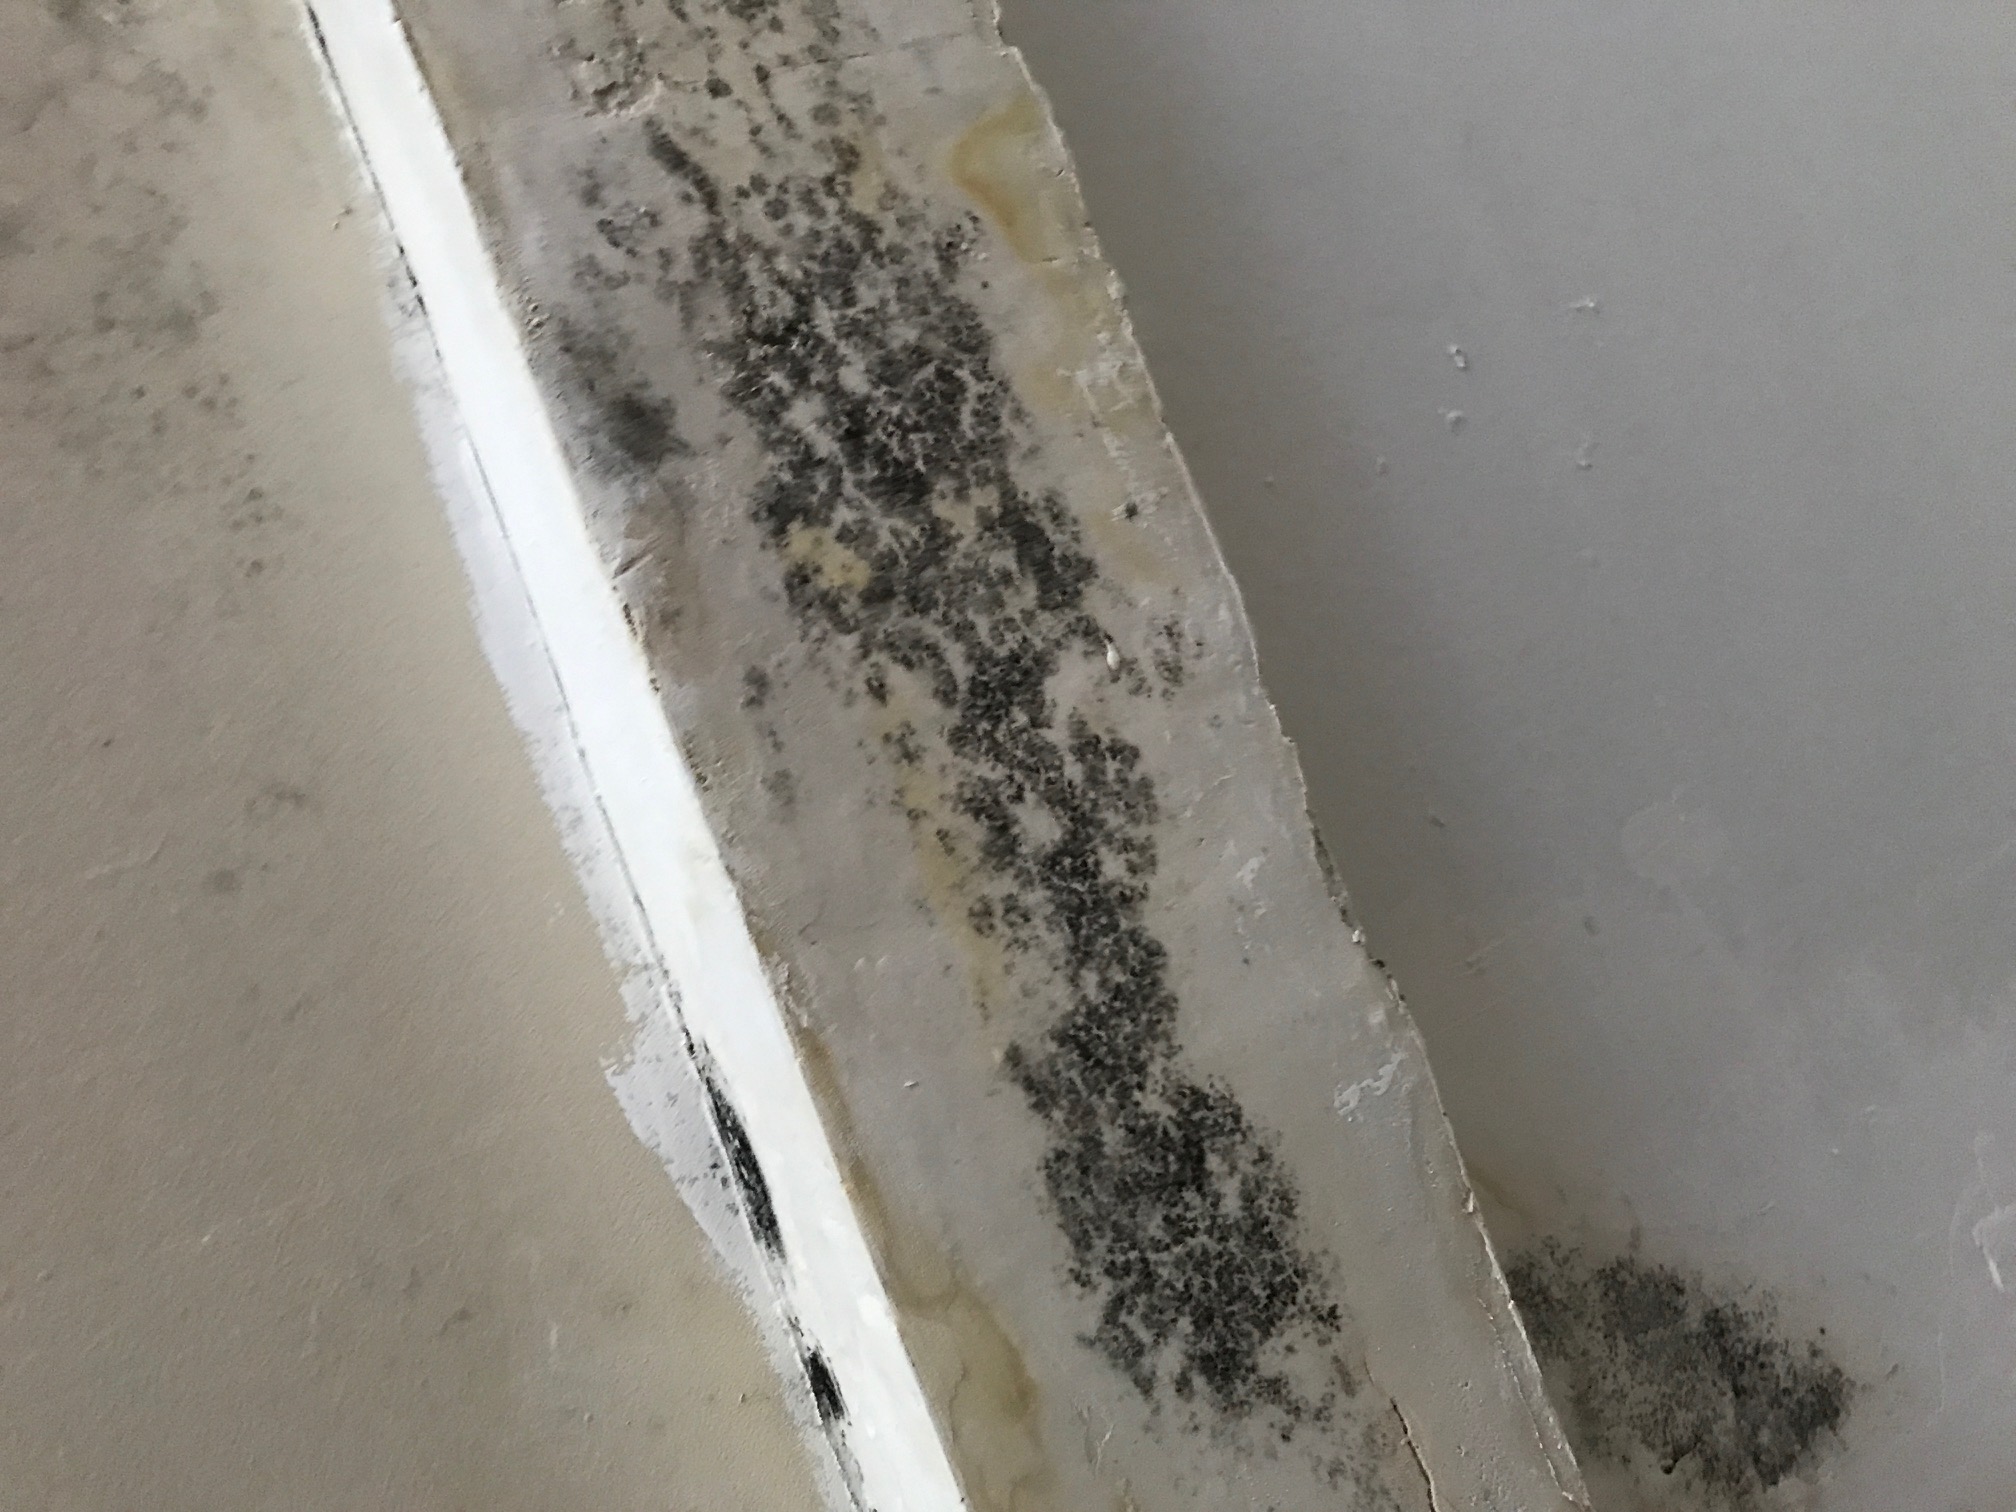 Mold returns after vendors paint over it